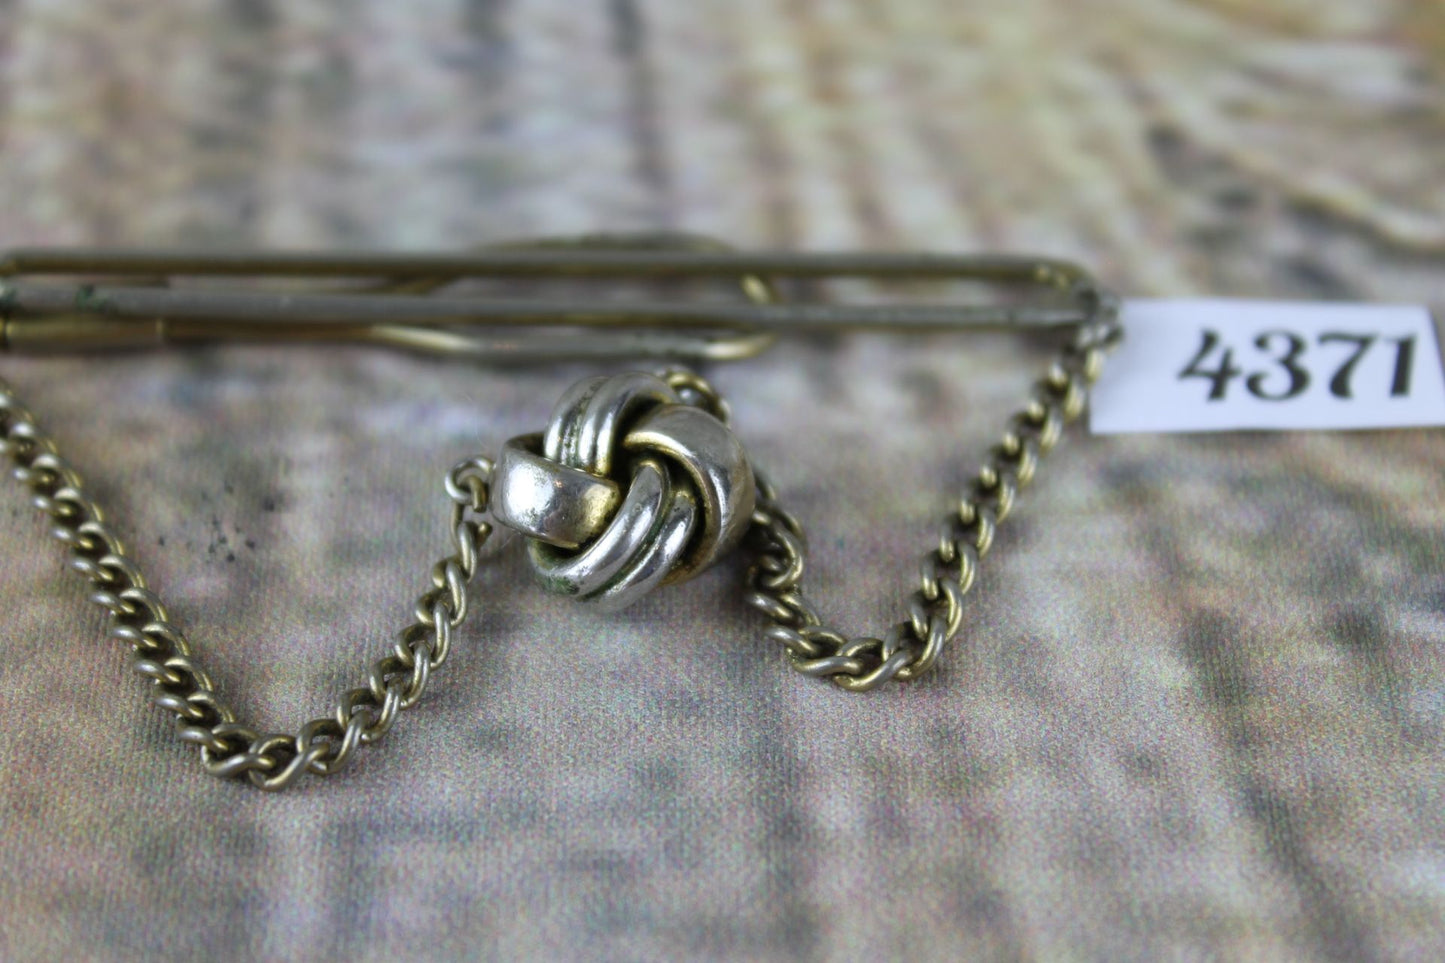 Vintage SWANK tie chain with hanging knot clip to shirt chain hangs over tie